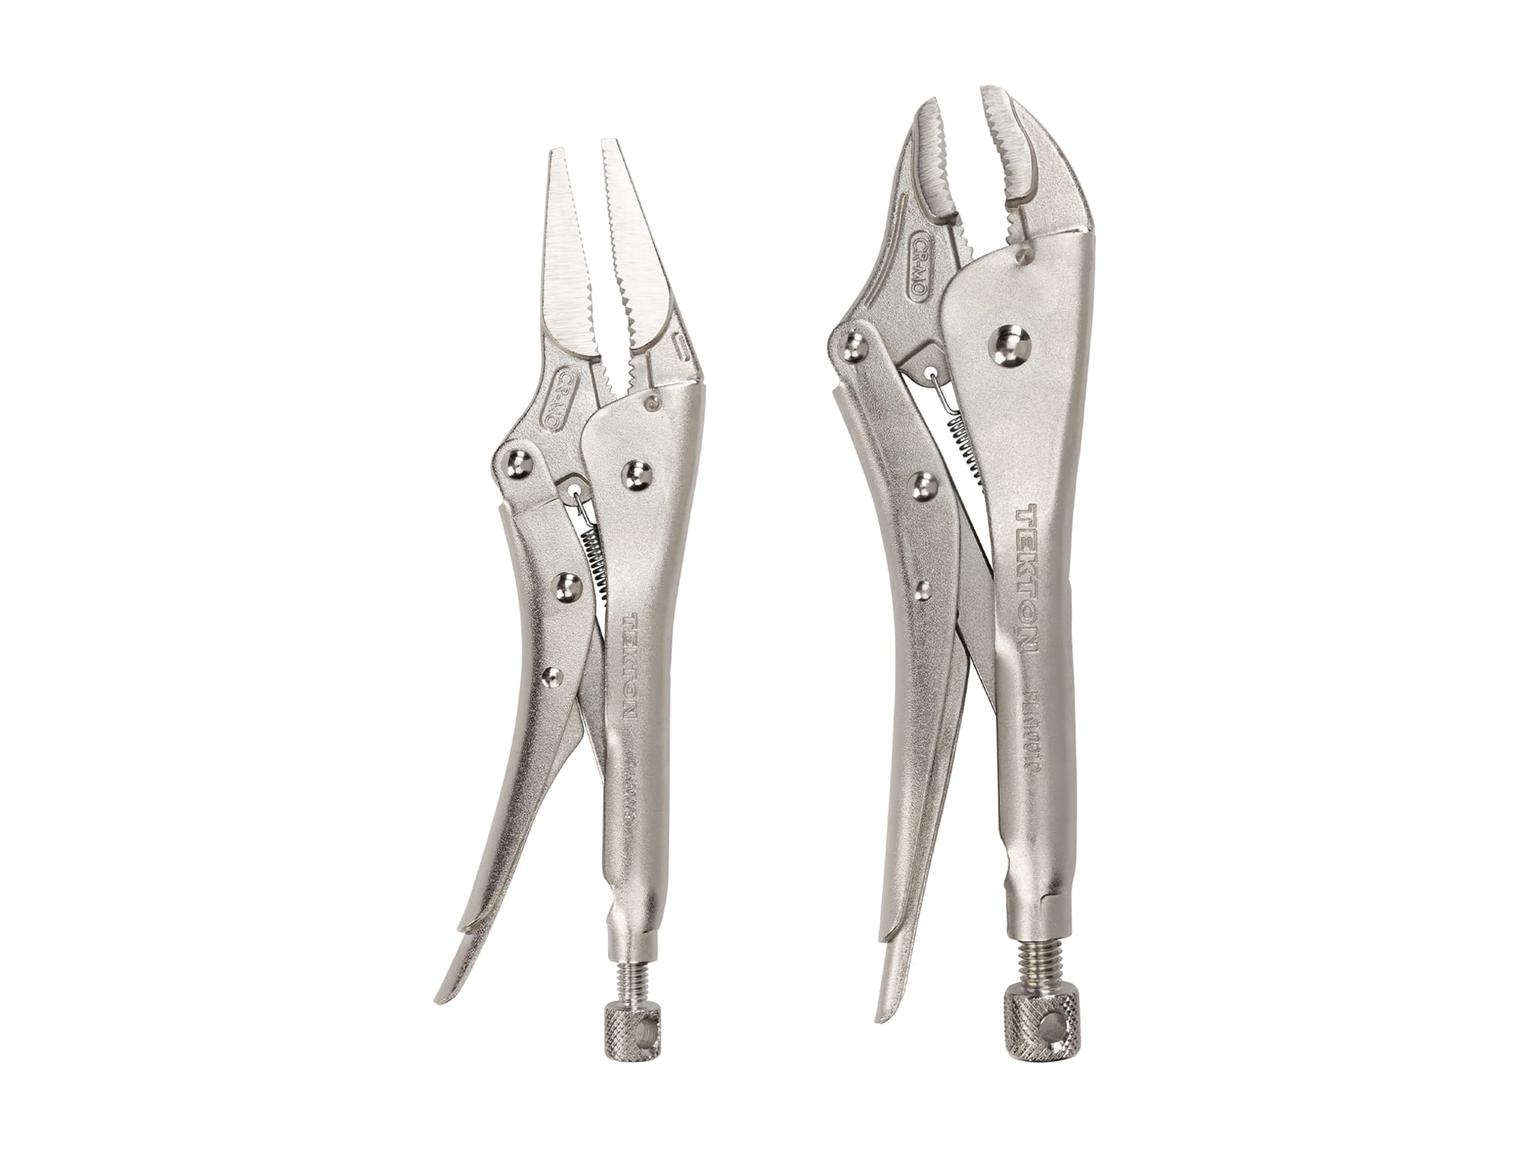 Locking Pliers Set, 2-Piece (Curved Jaw, Long Nose)